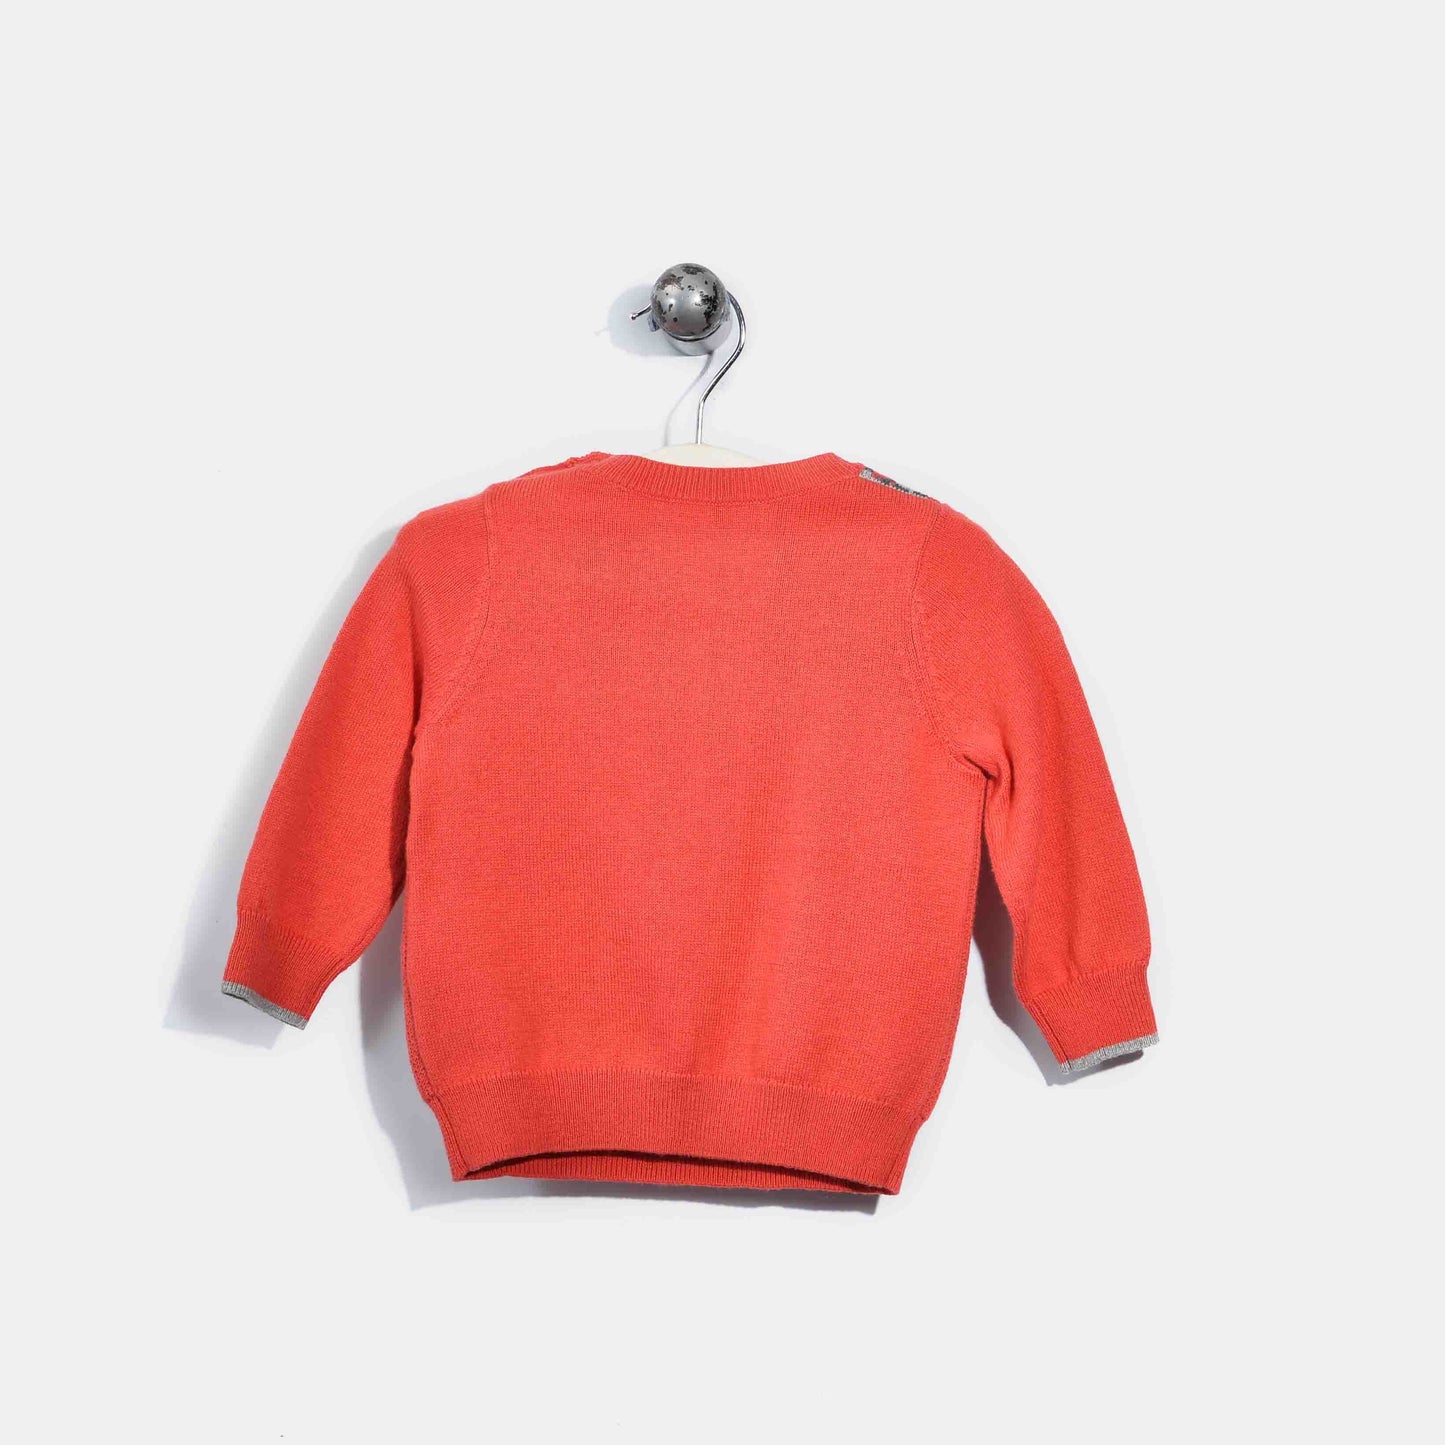 SWEATER - BABY - RED - L-LOLA